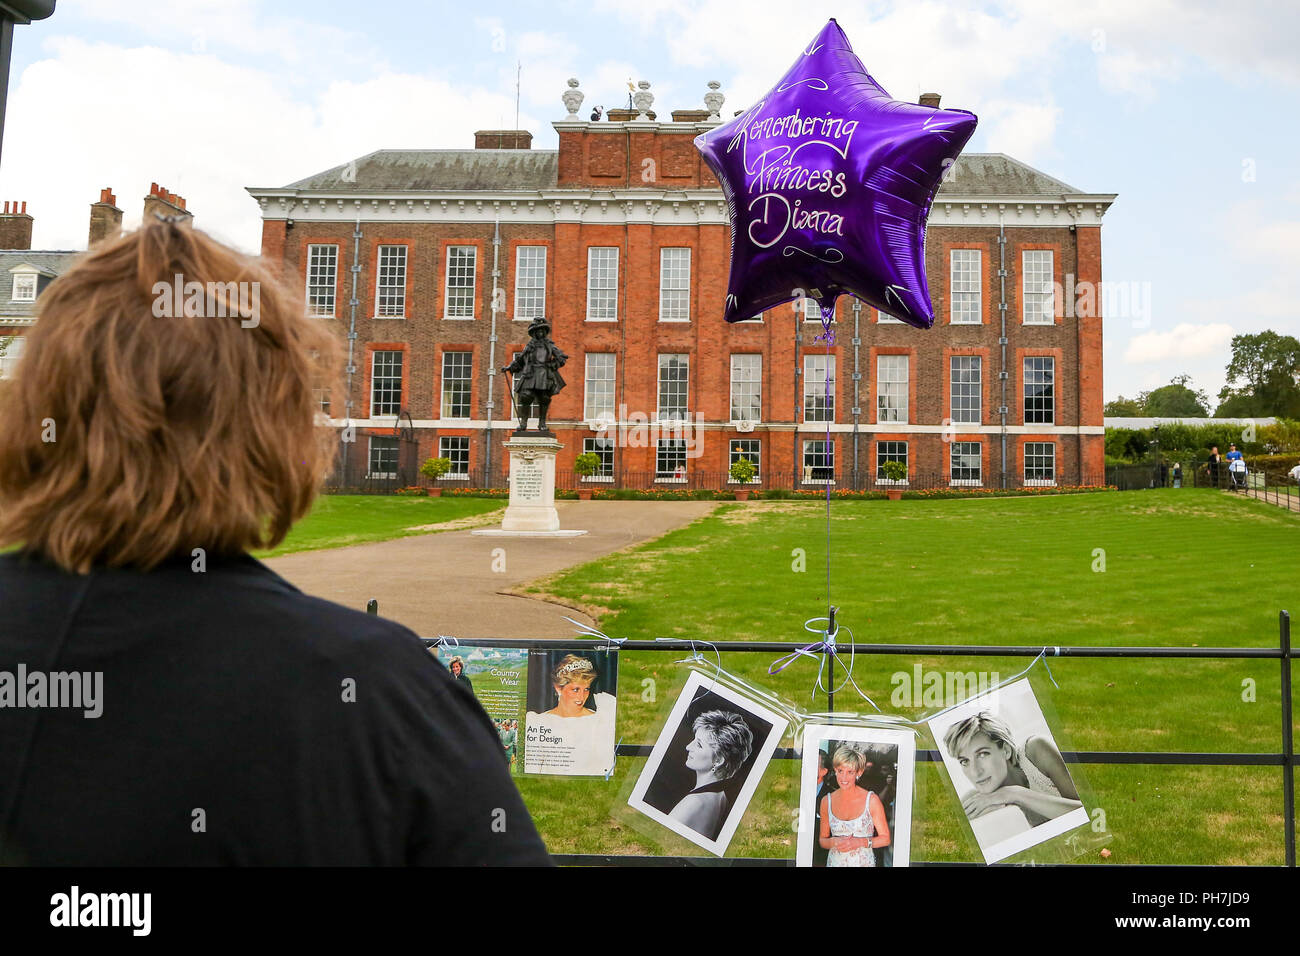 Kensington Palace. London. UK 31 Aug 2018 - A ballon is left by a well wisher at the gates to Kensington Palace to mark the 21st anniversary of the death of Diana, Princess of Wales, who tragically died in a car accident in Paris, France on 31st August 1997  Credit: Dinendra Haria/Alamy Live News Stock Photo